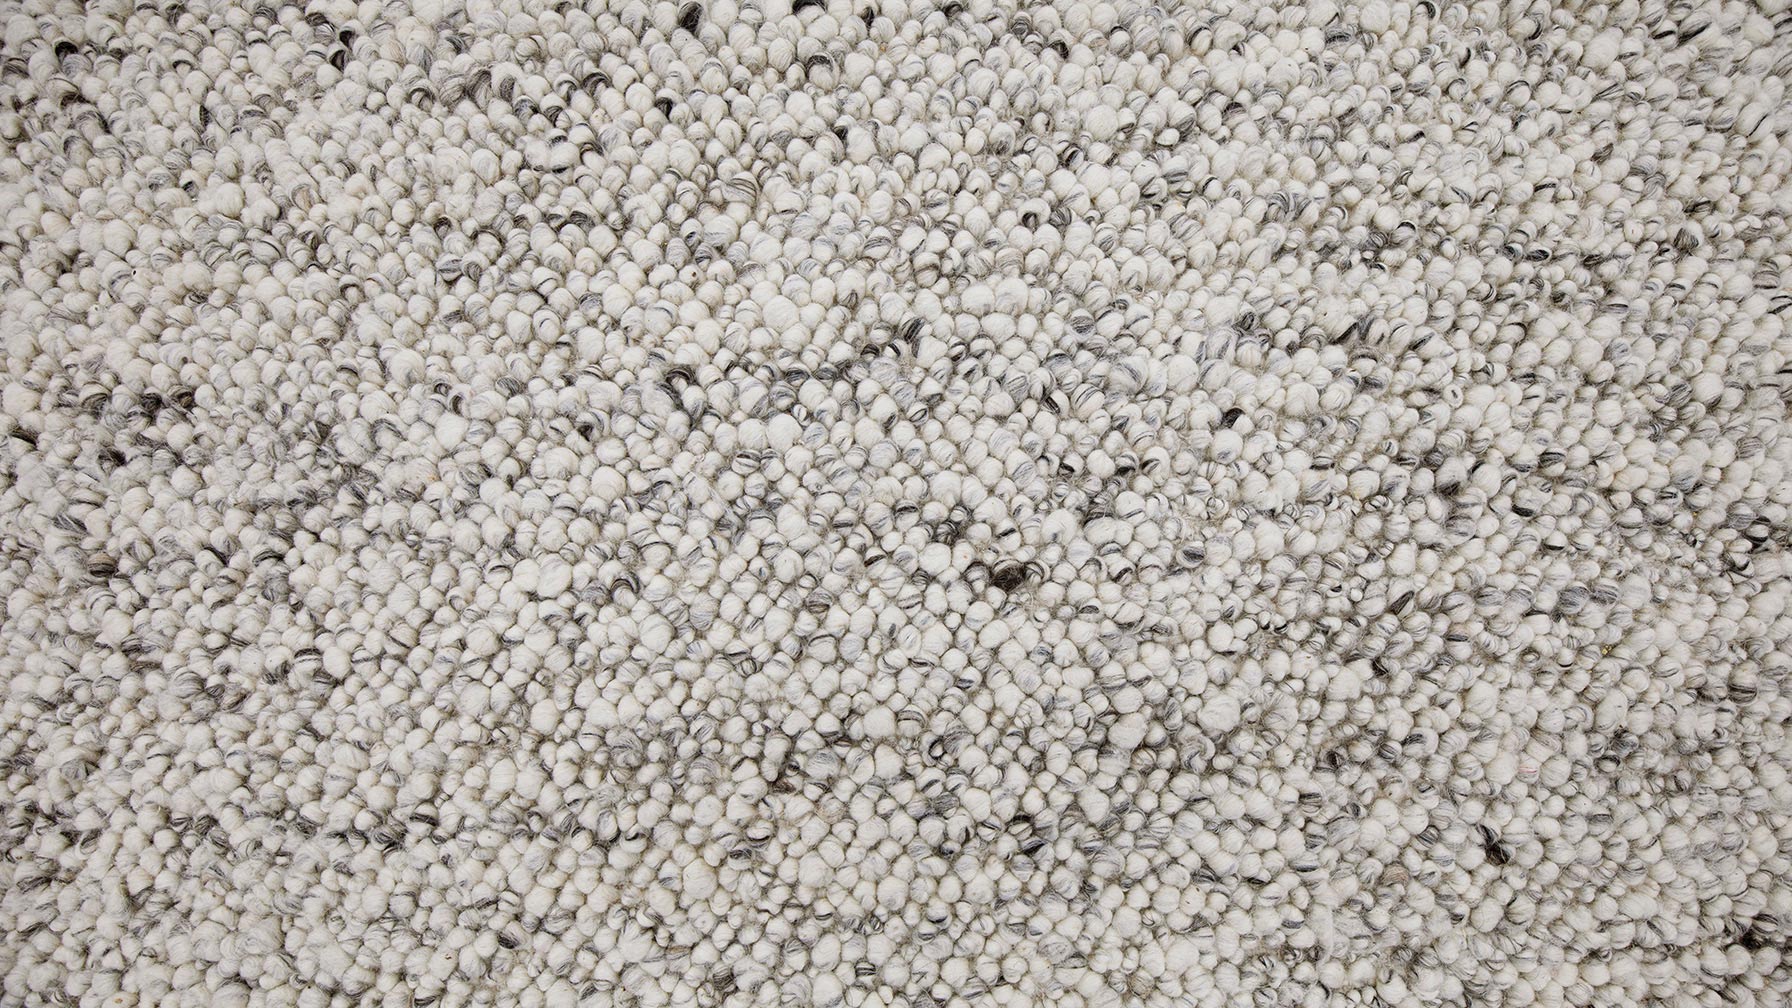 Gather Rug, 8x10, Oyster - Image 7